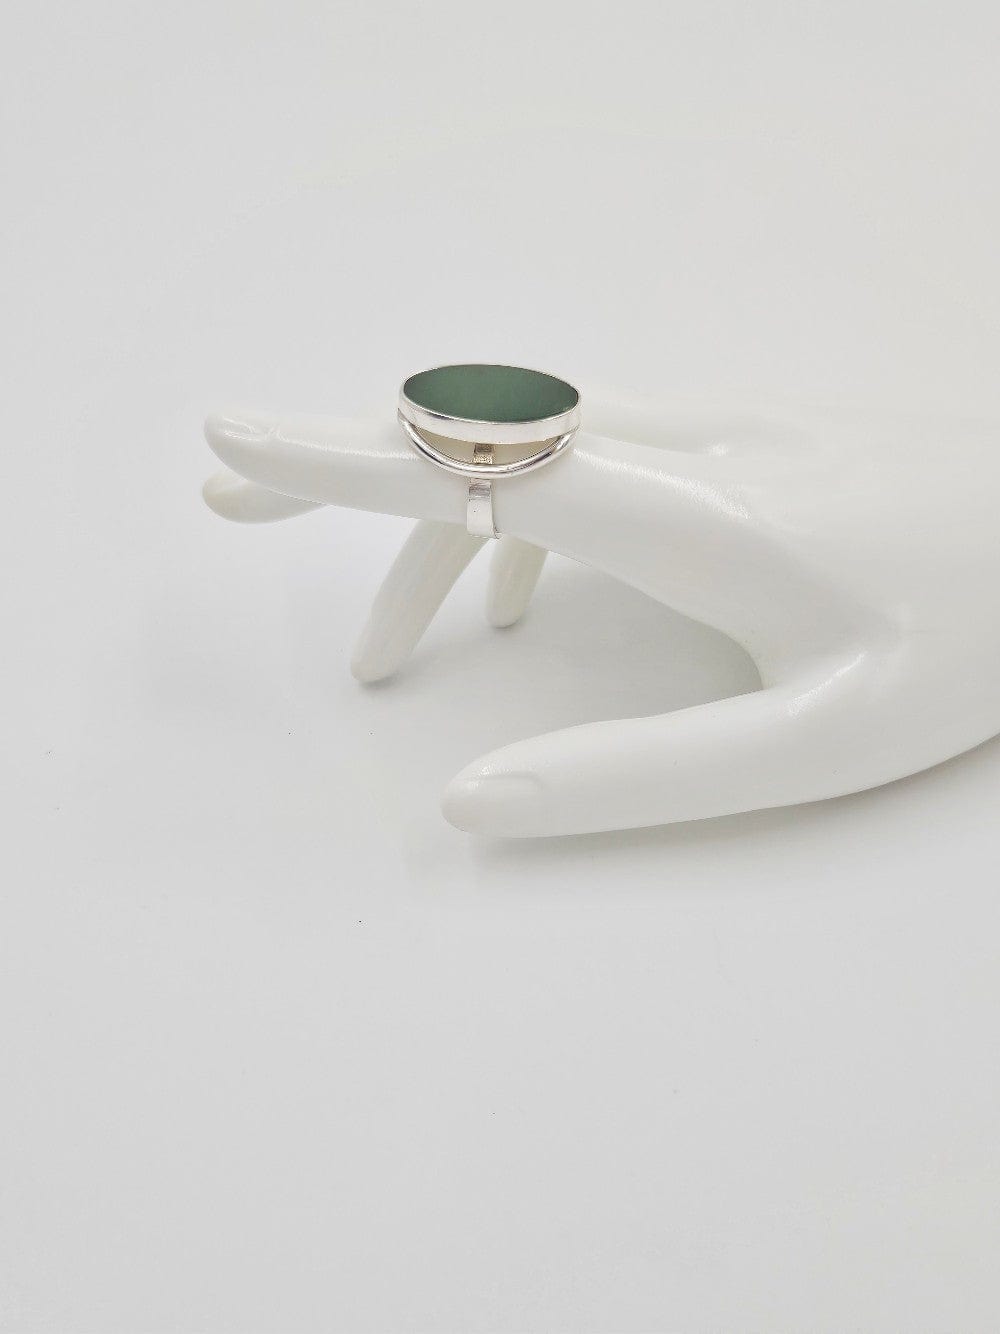 Niels Erik From Jewelry Niels Erik From Denmark Sterling Silver & Nephrite Modernist Ring Circa 1960's